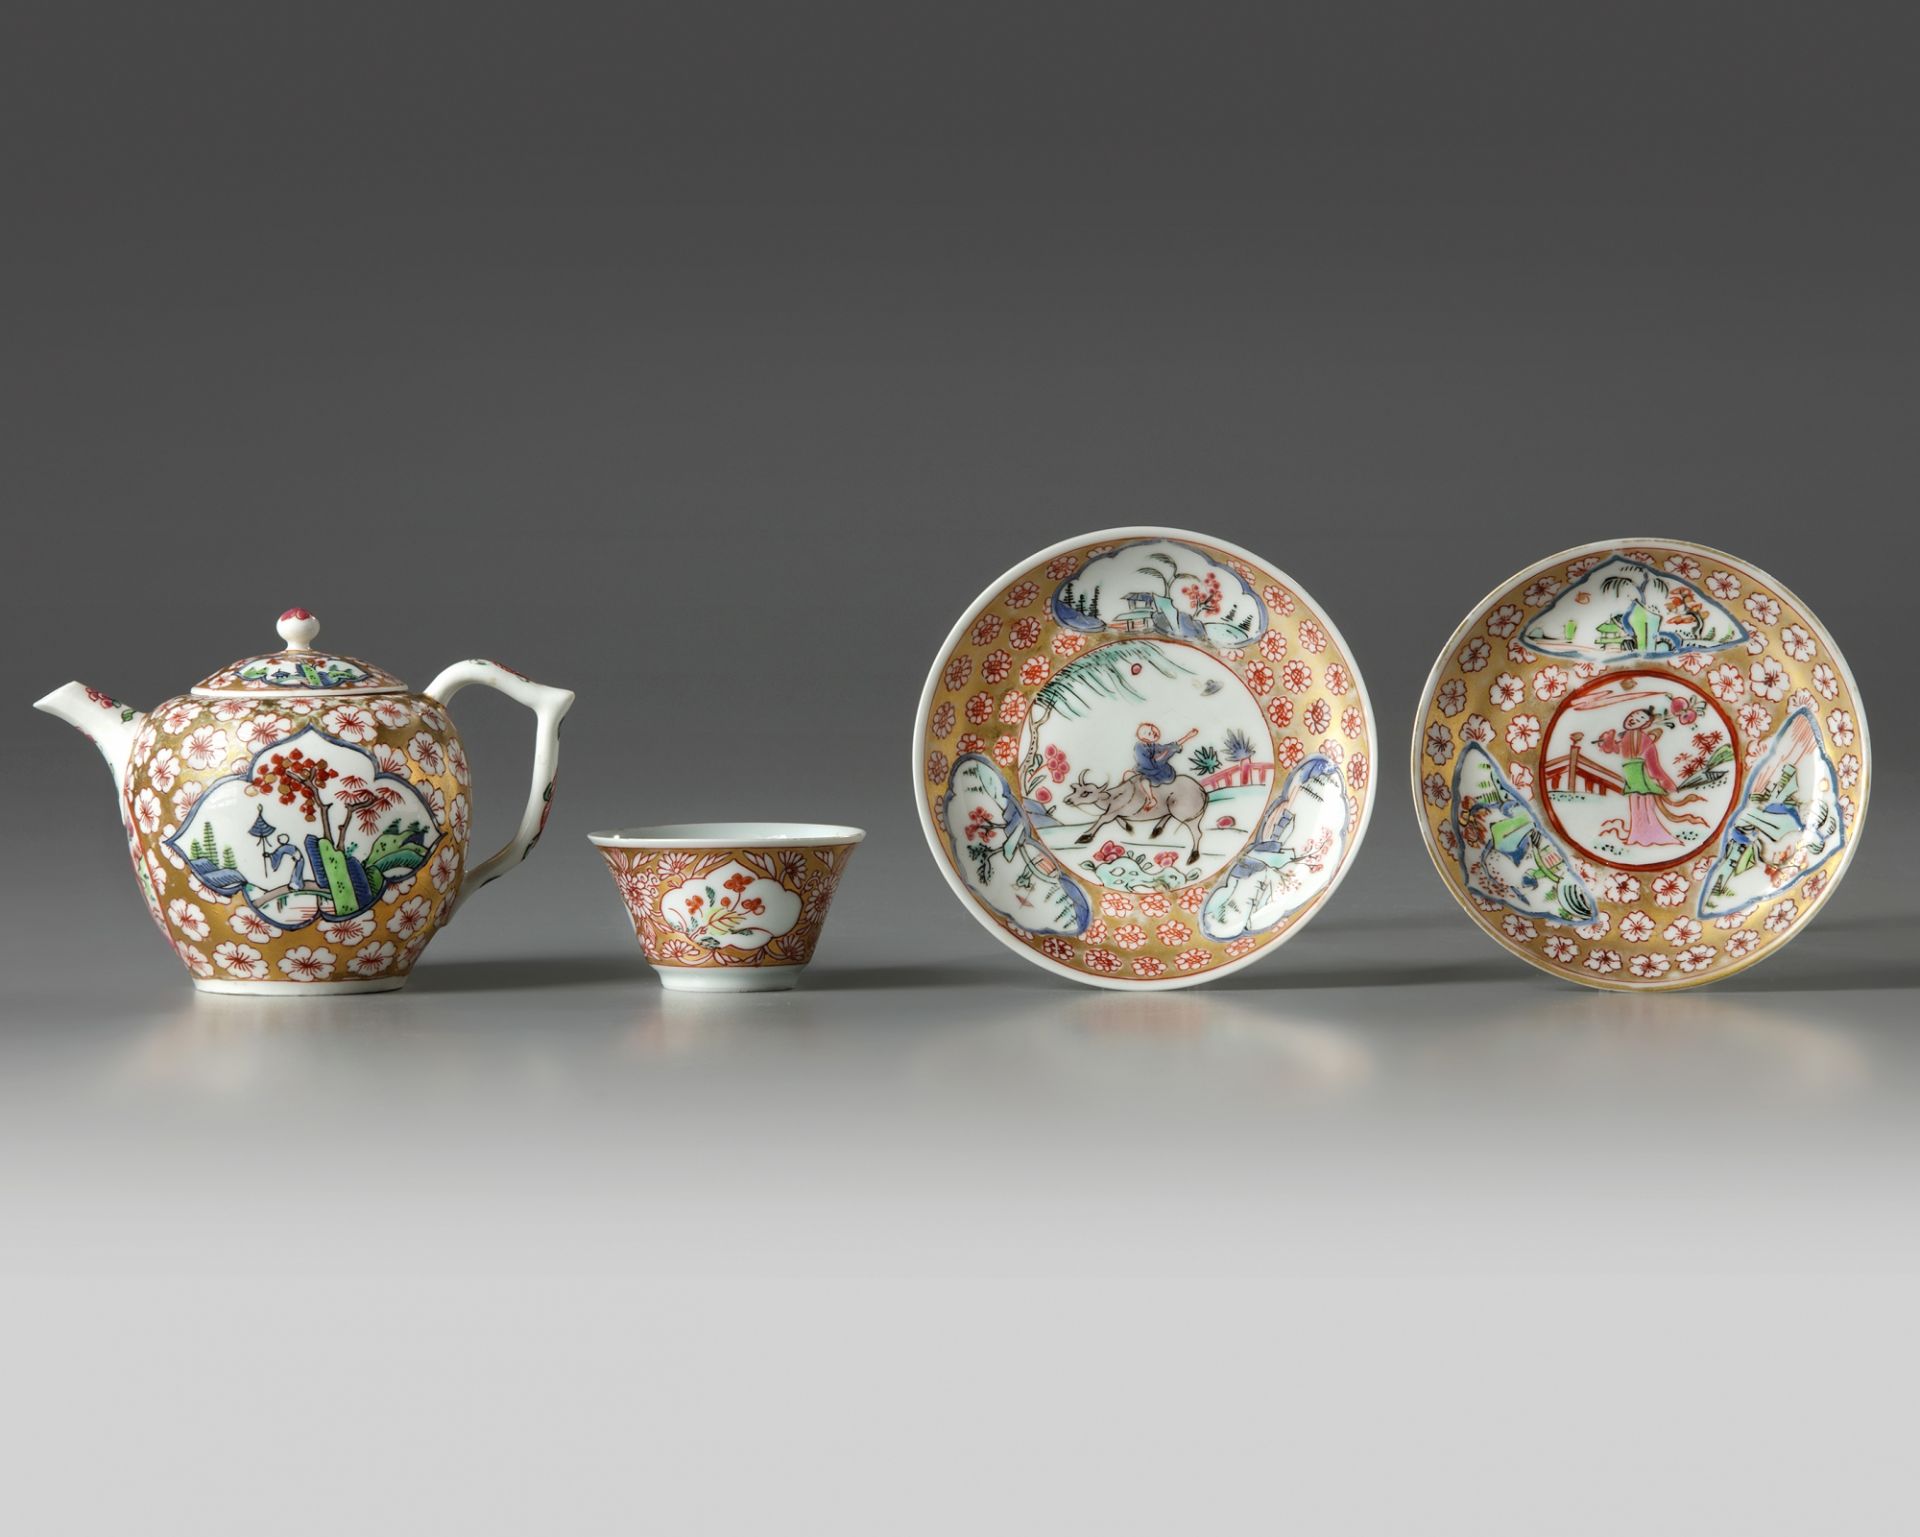 A Chinese gilt and famille rose-decorated cups and saucers and a Meissen 'Chinoiserie' teapot